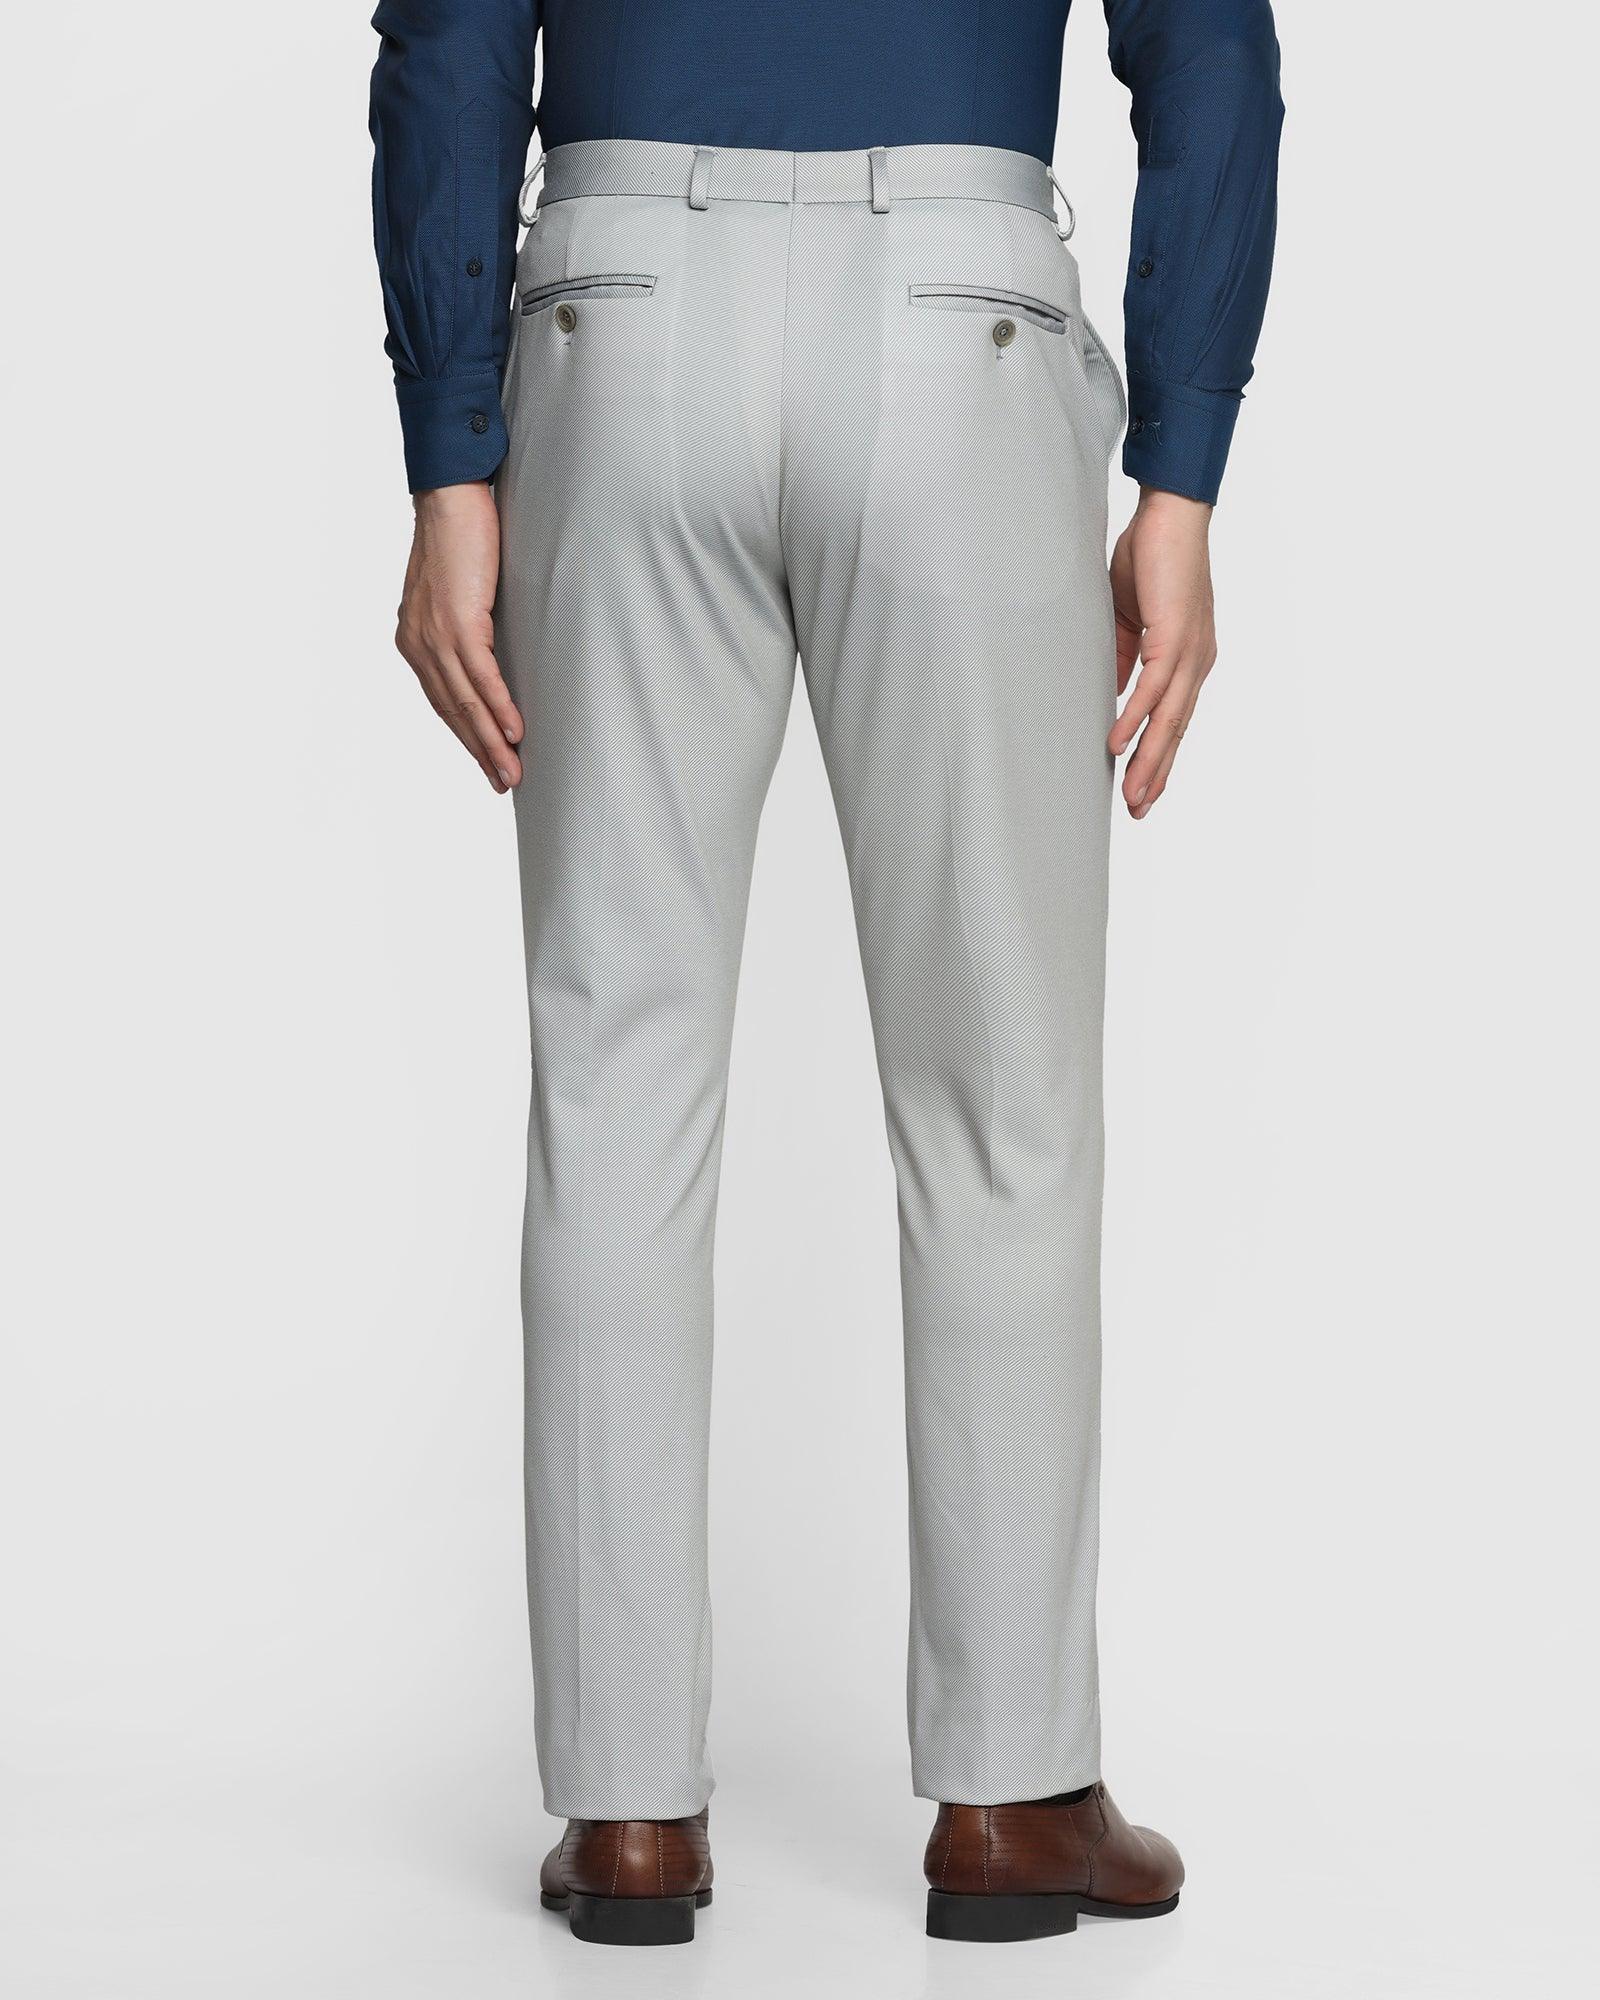 Buy Farah Men Navy 4-Way Stretch Trousers Online - 788674 | The Collective